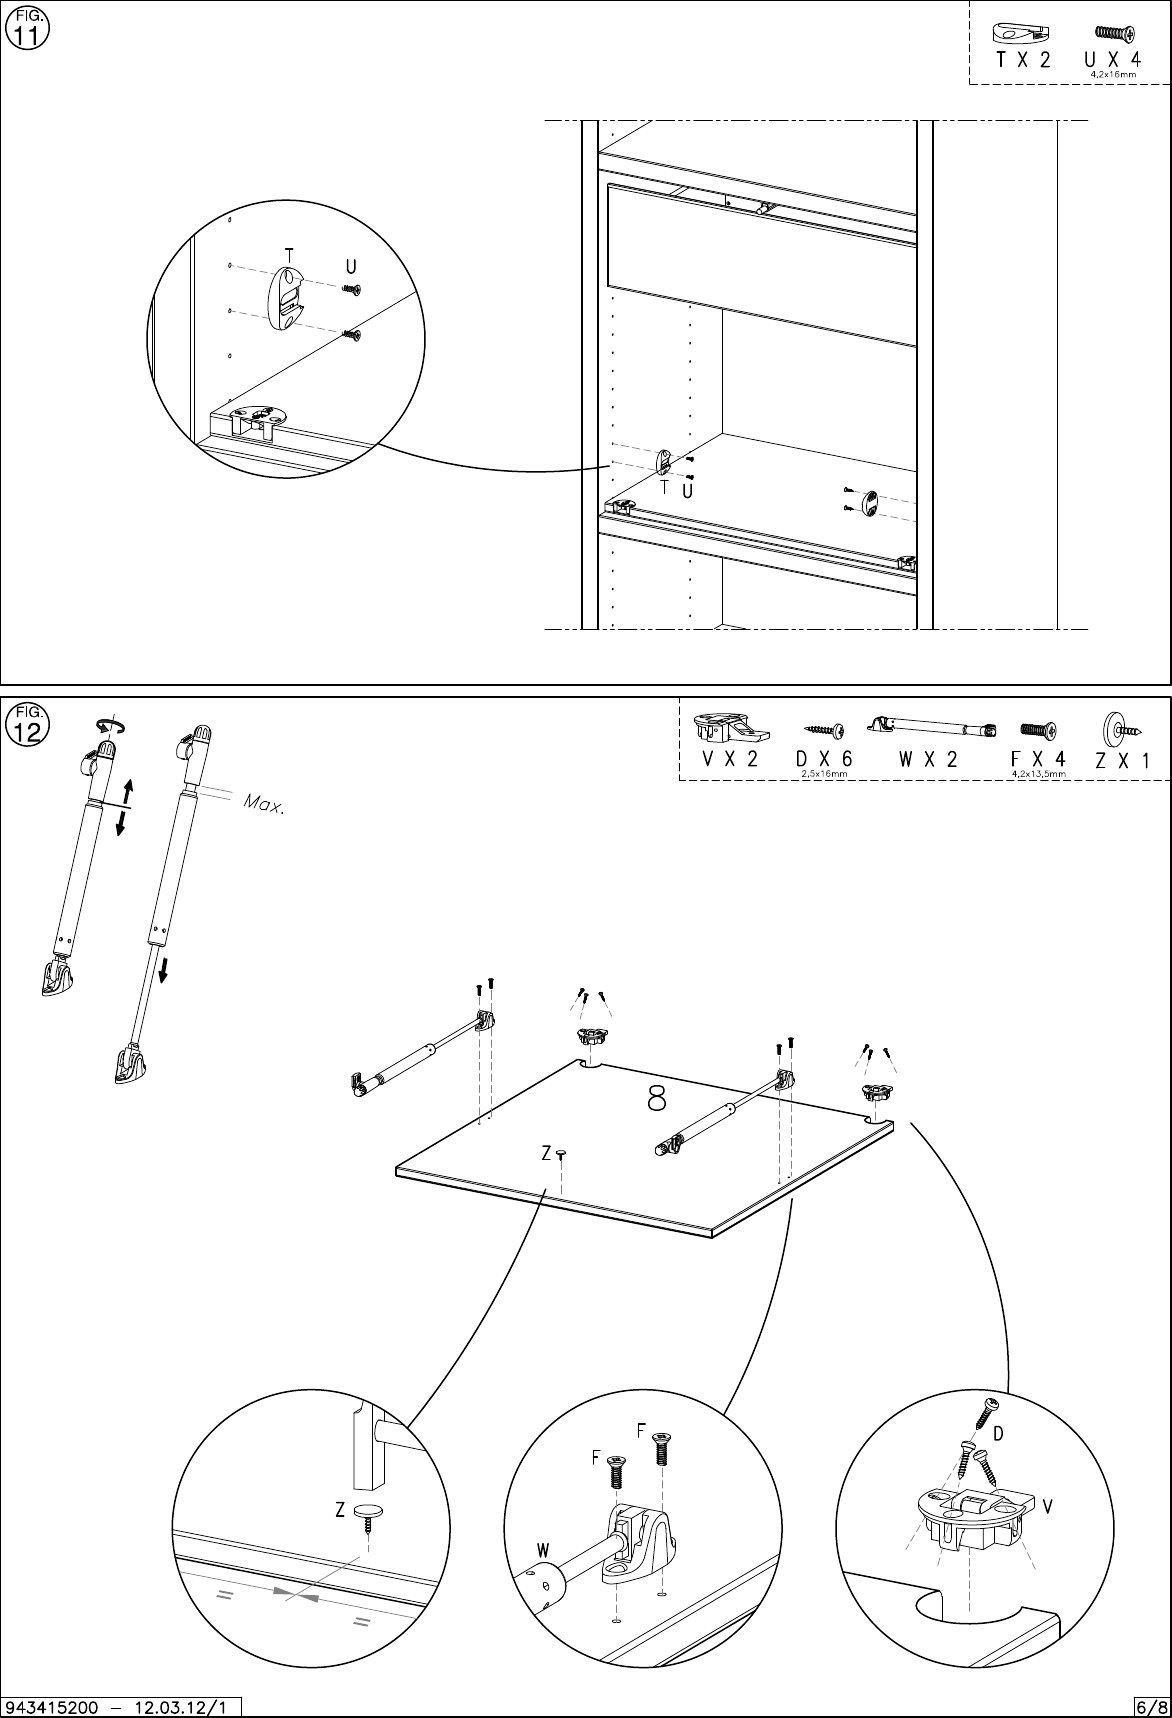 Page 6 of 8 - Boconcept Boconcept--5200-Assembly-Instruction B:\DK_PTA_Share\Inventor Ation\341 Lecco\Lecco 5200\Assembly Instruction\943415200_v1_10